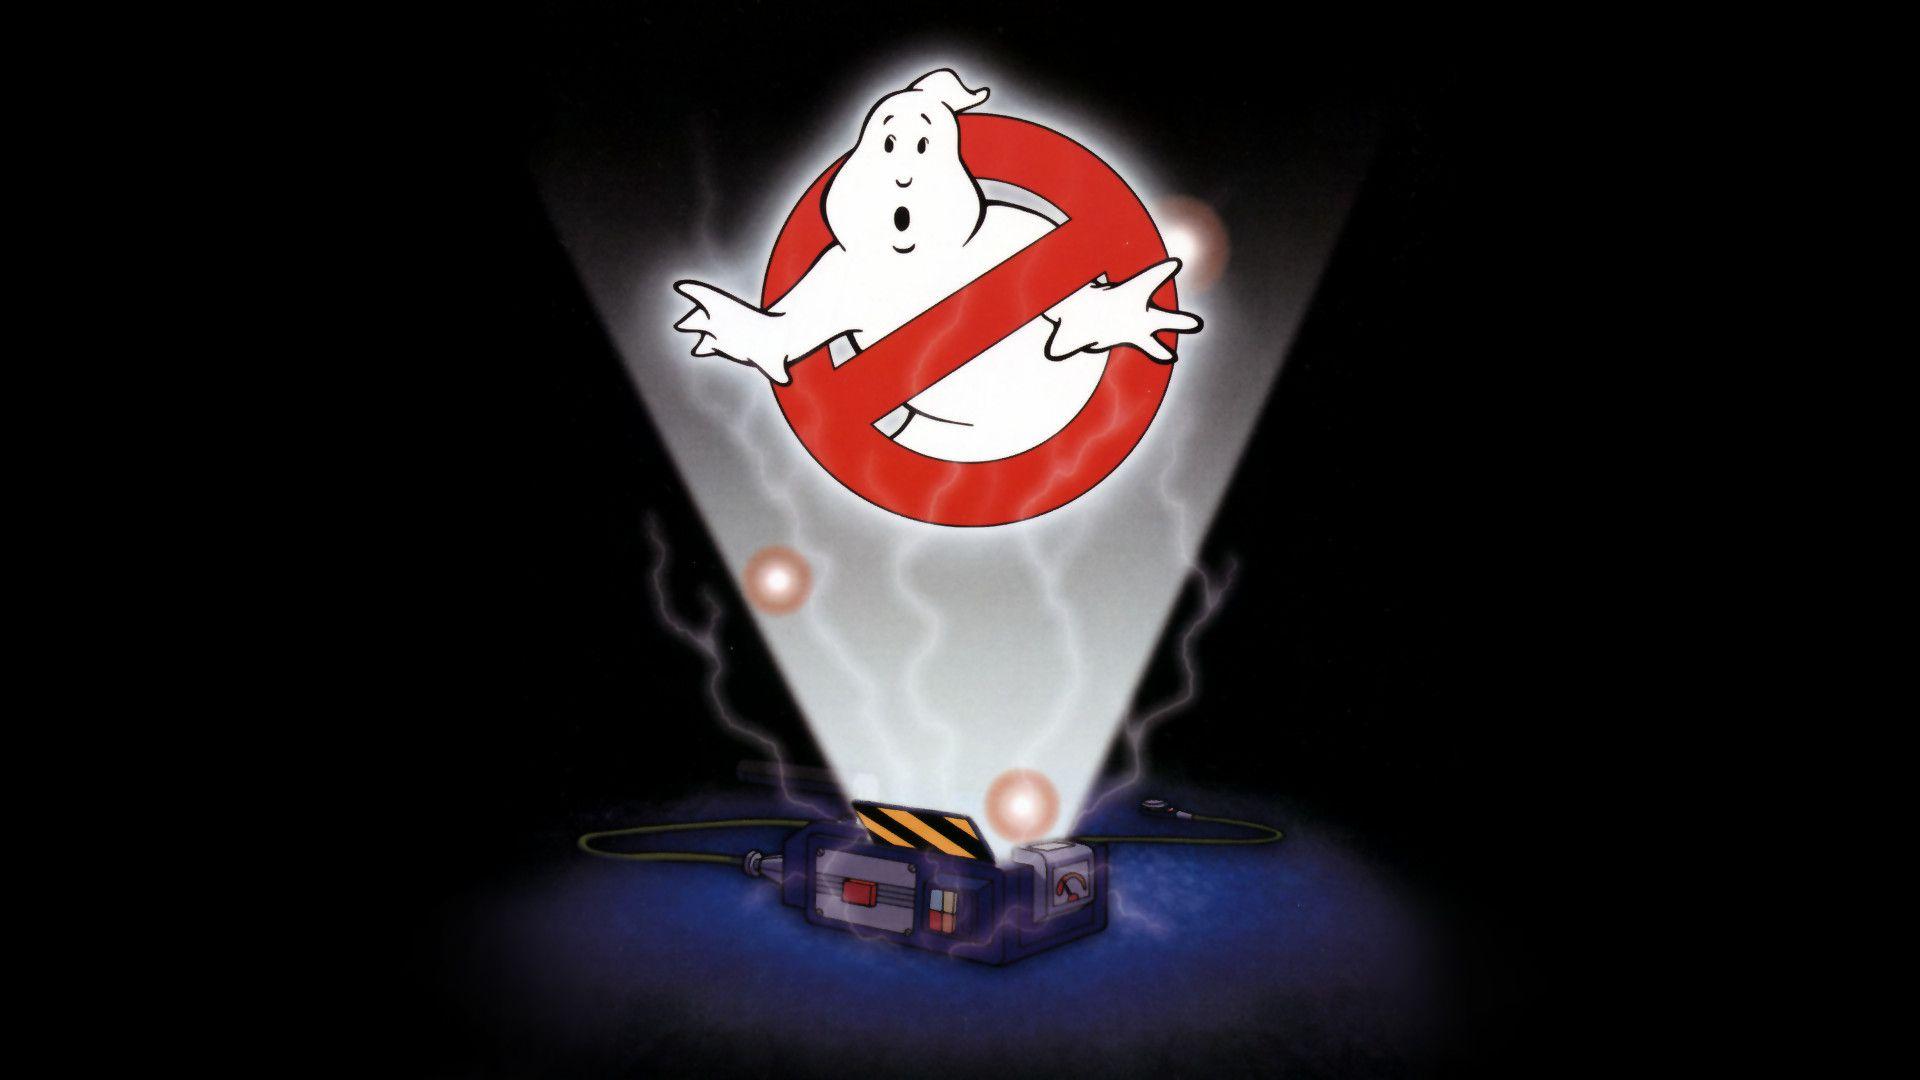 Ghostbusters Logo Wallpapers Wallpaper Cave